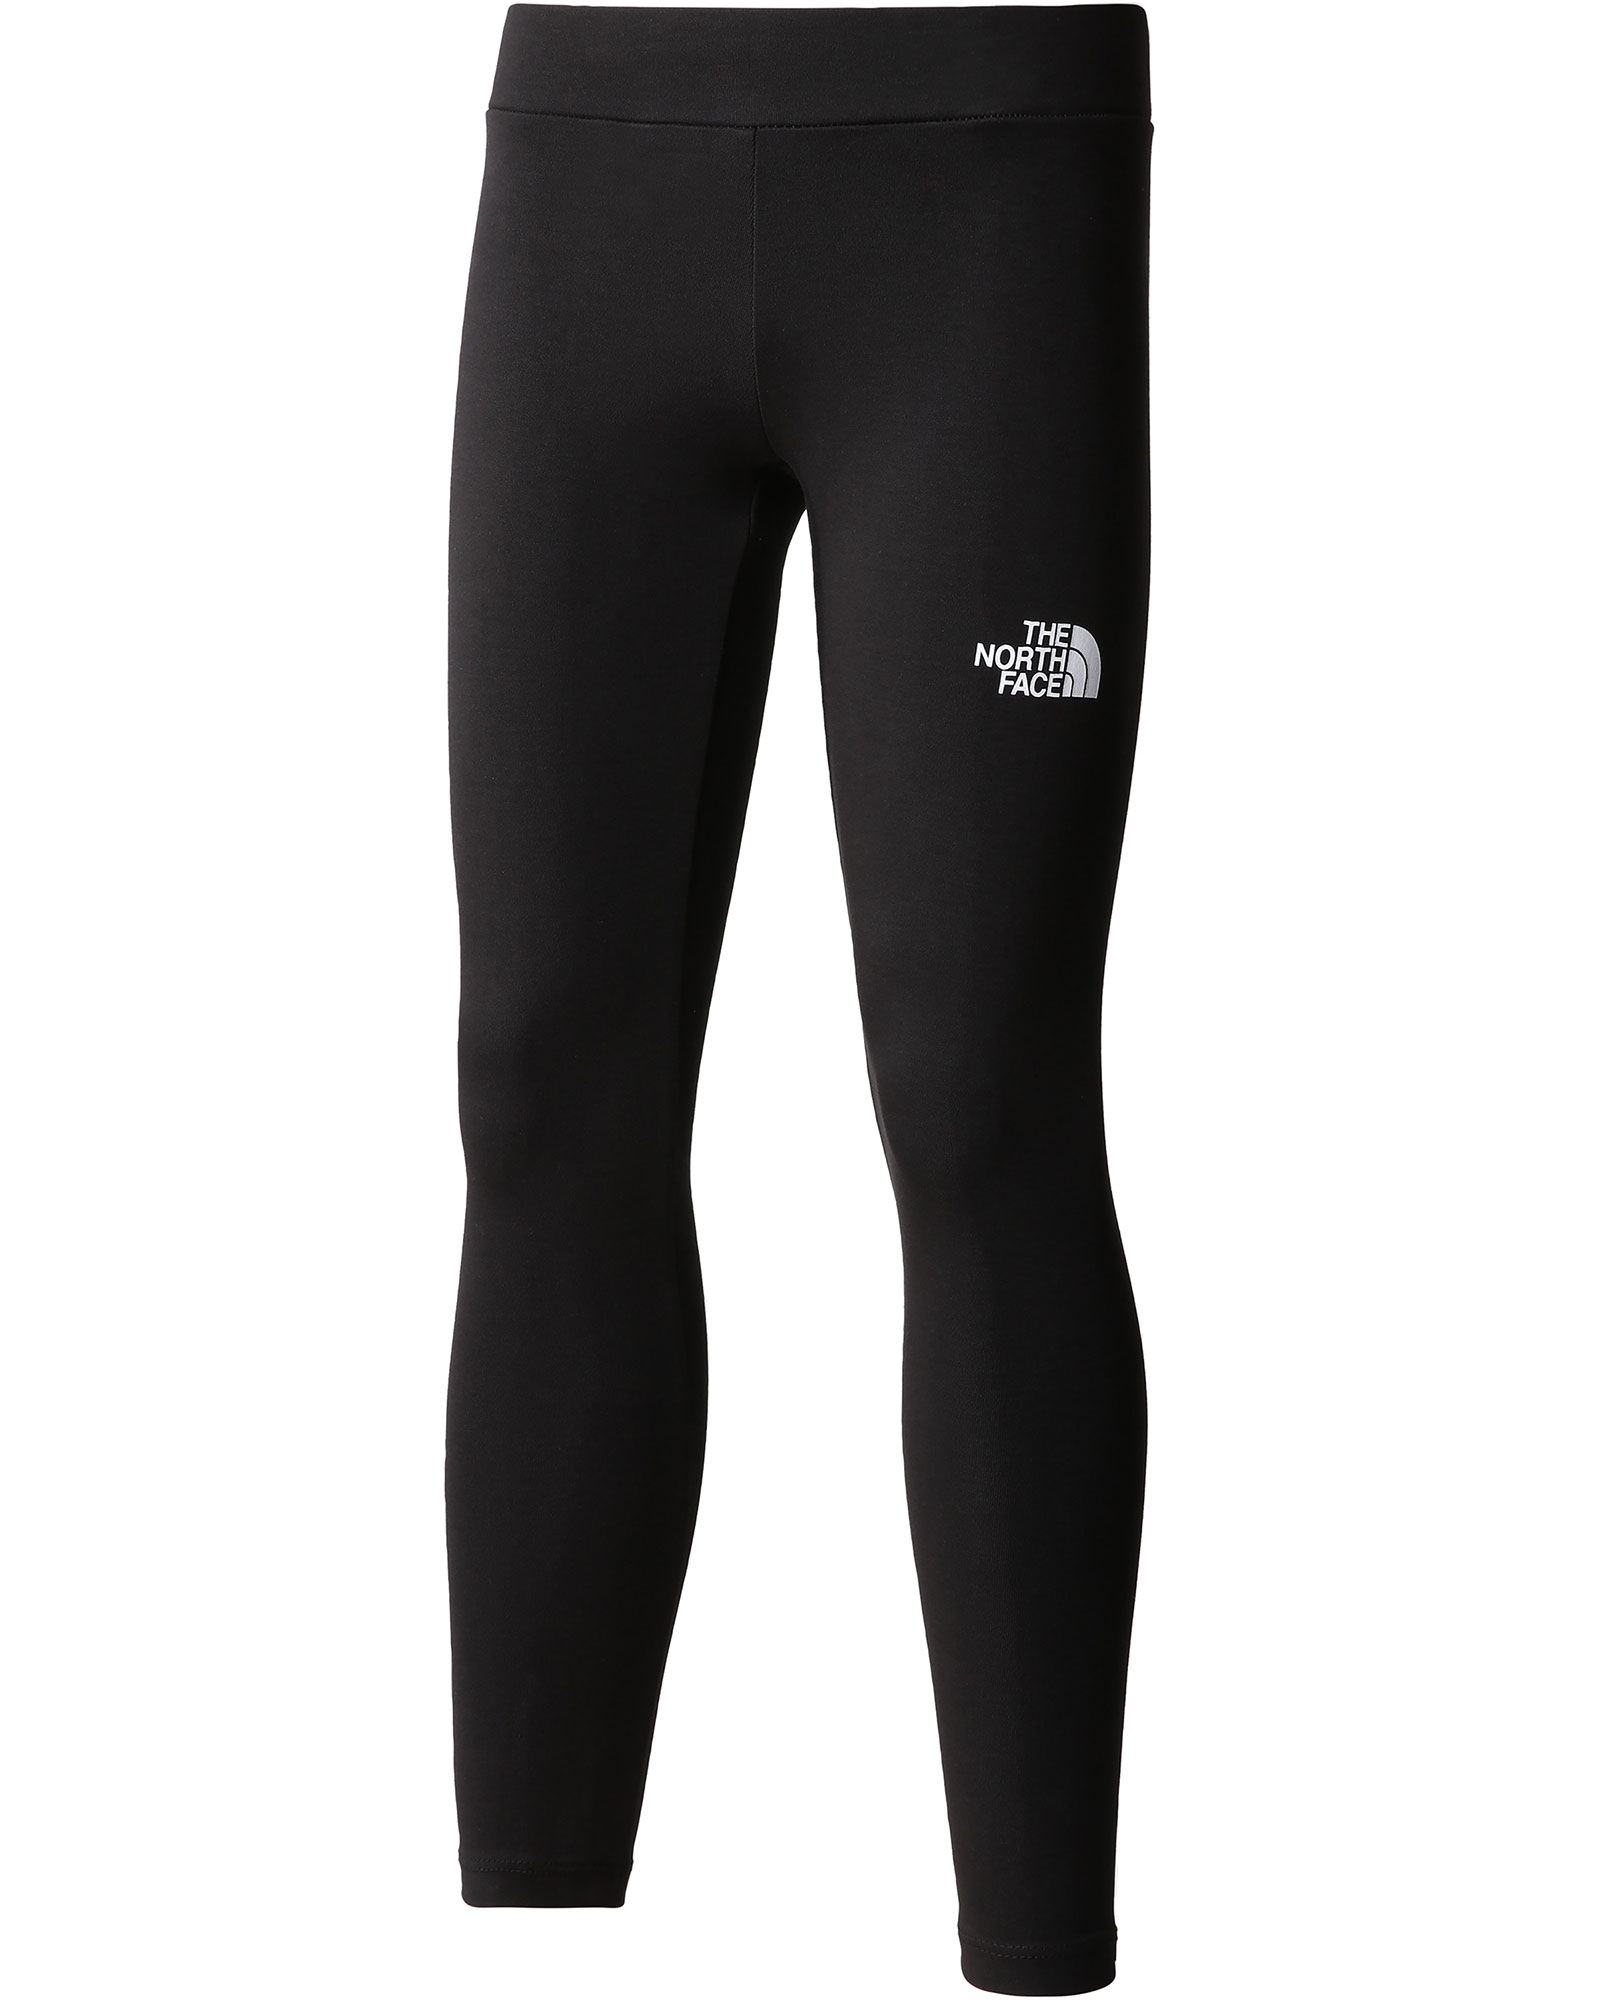 The North Face Graphic Kids Leggings